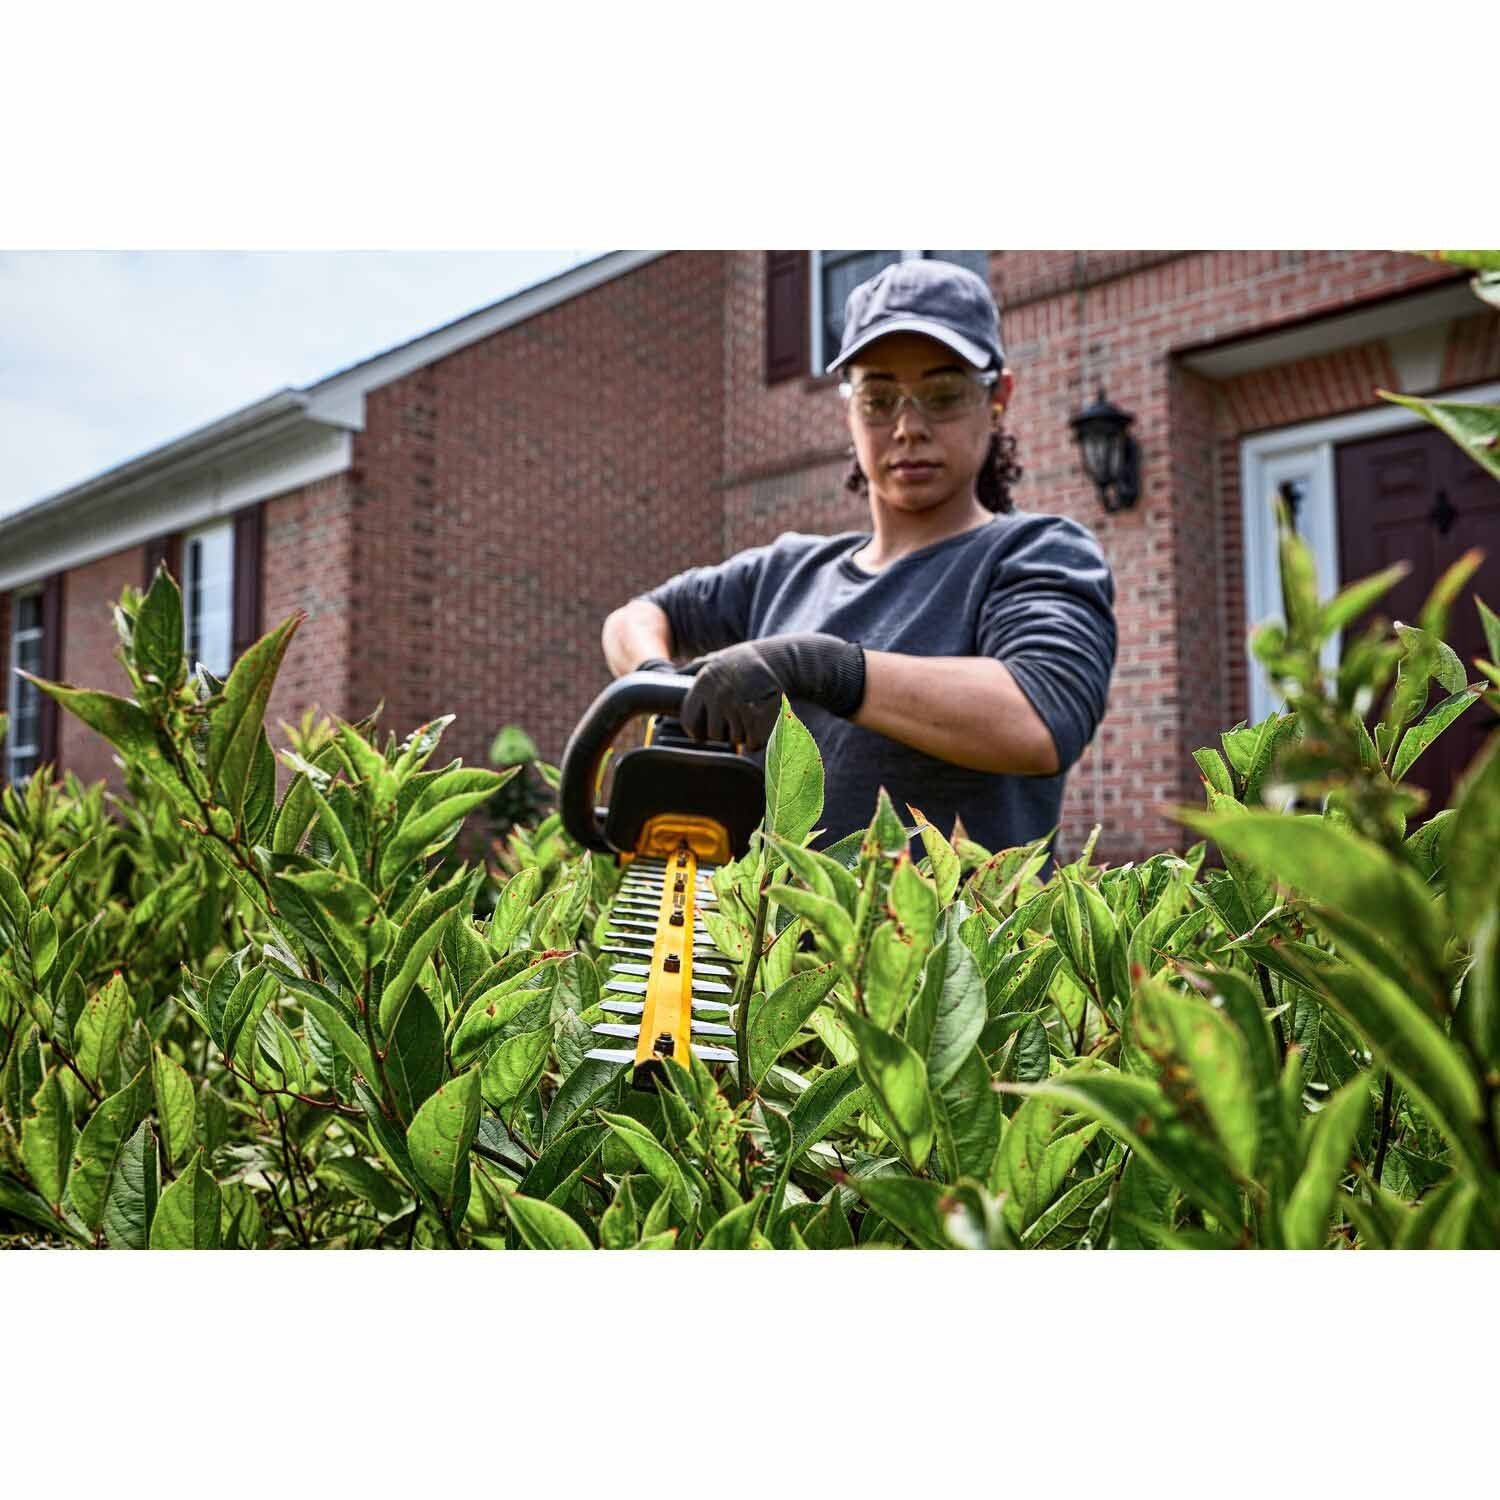 DeWalt DCHT870B 60V MAX* 26 in. Brushless Cordless Hedge Trimmer (Tool Only)